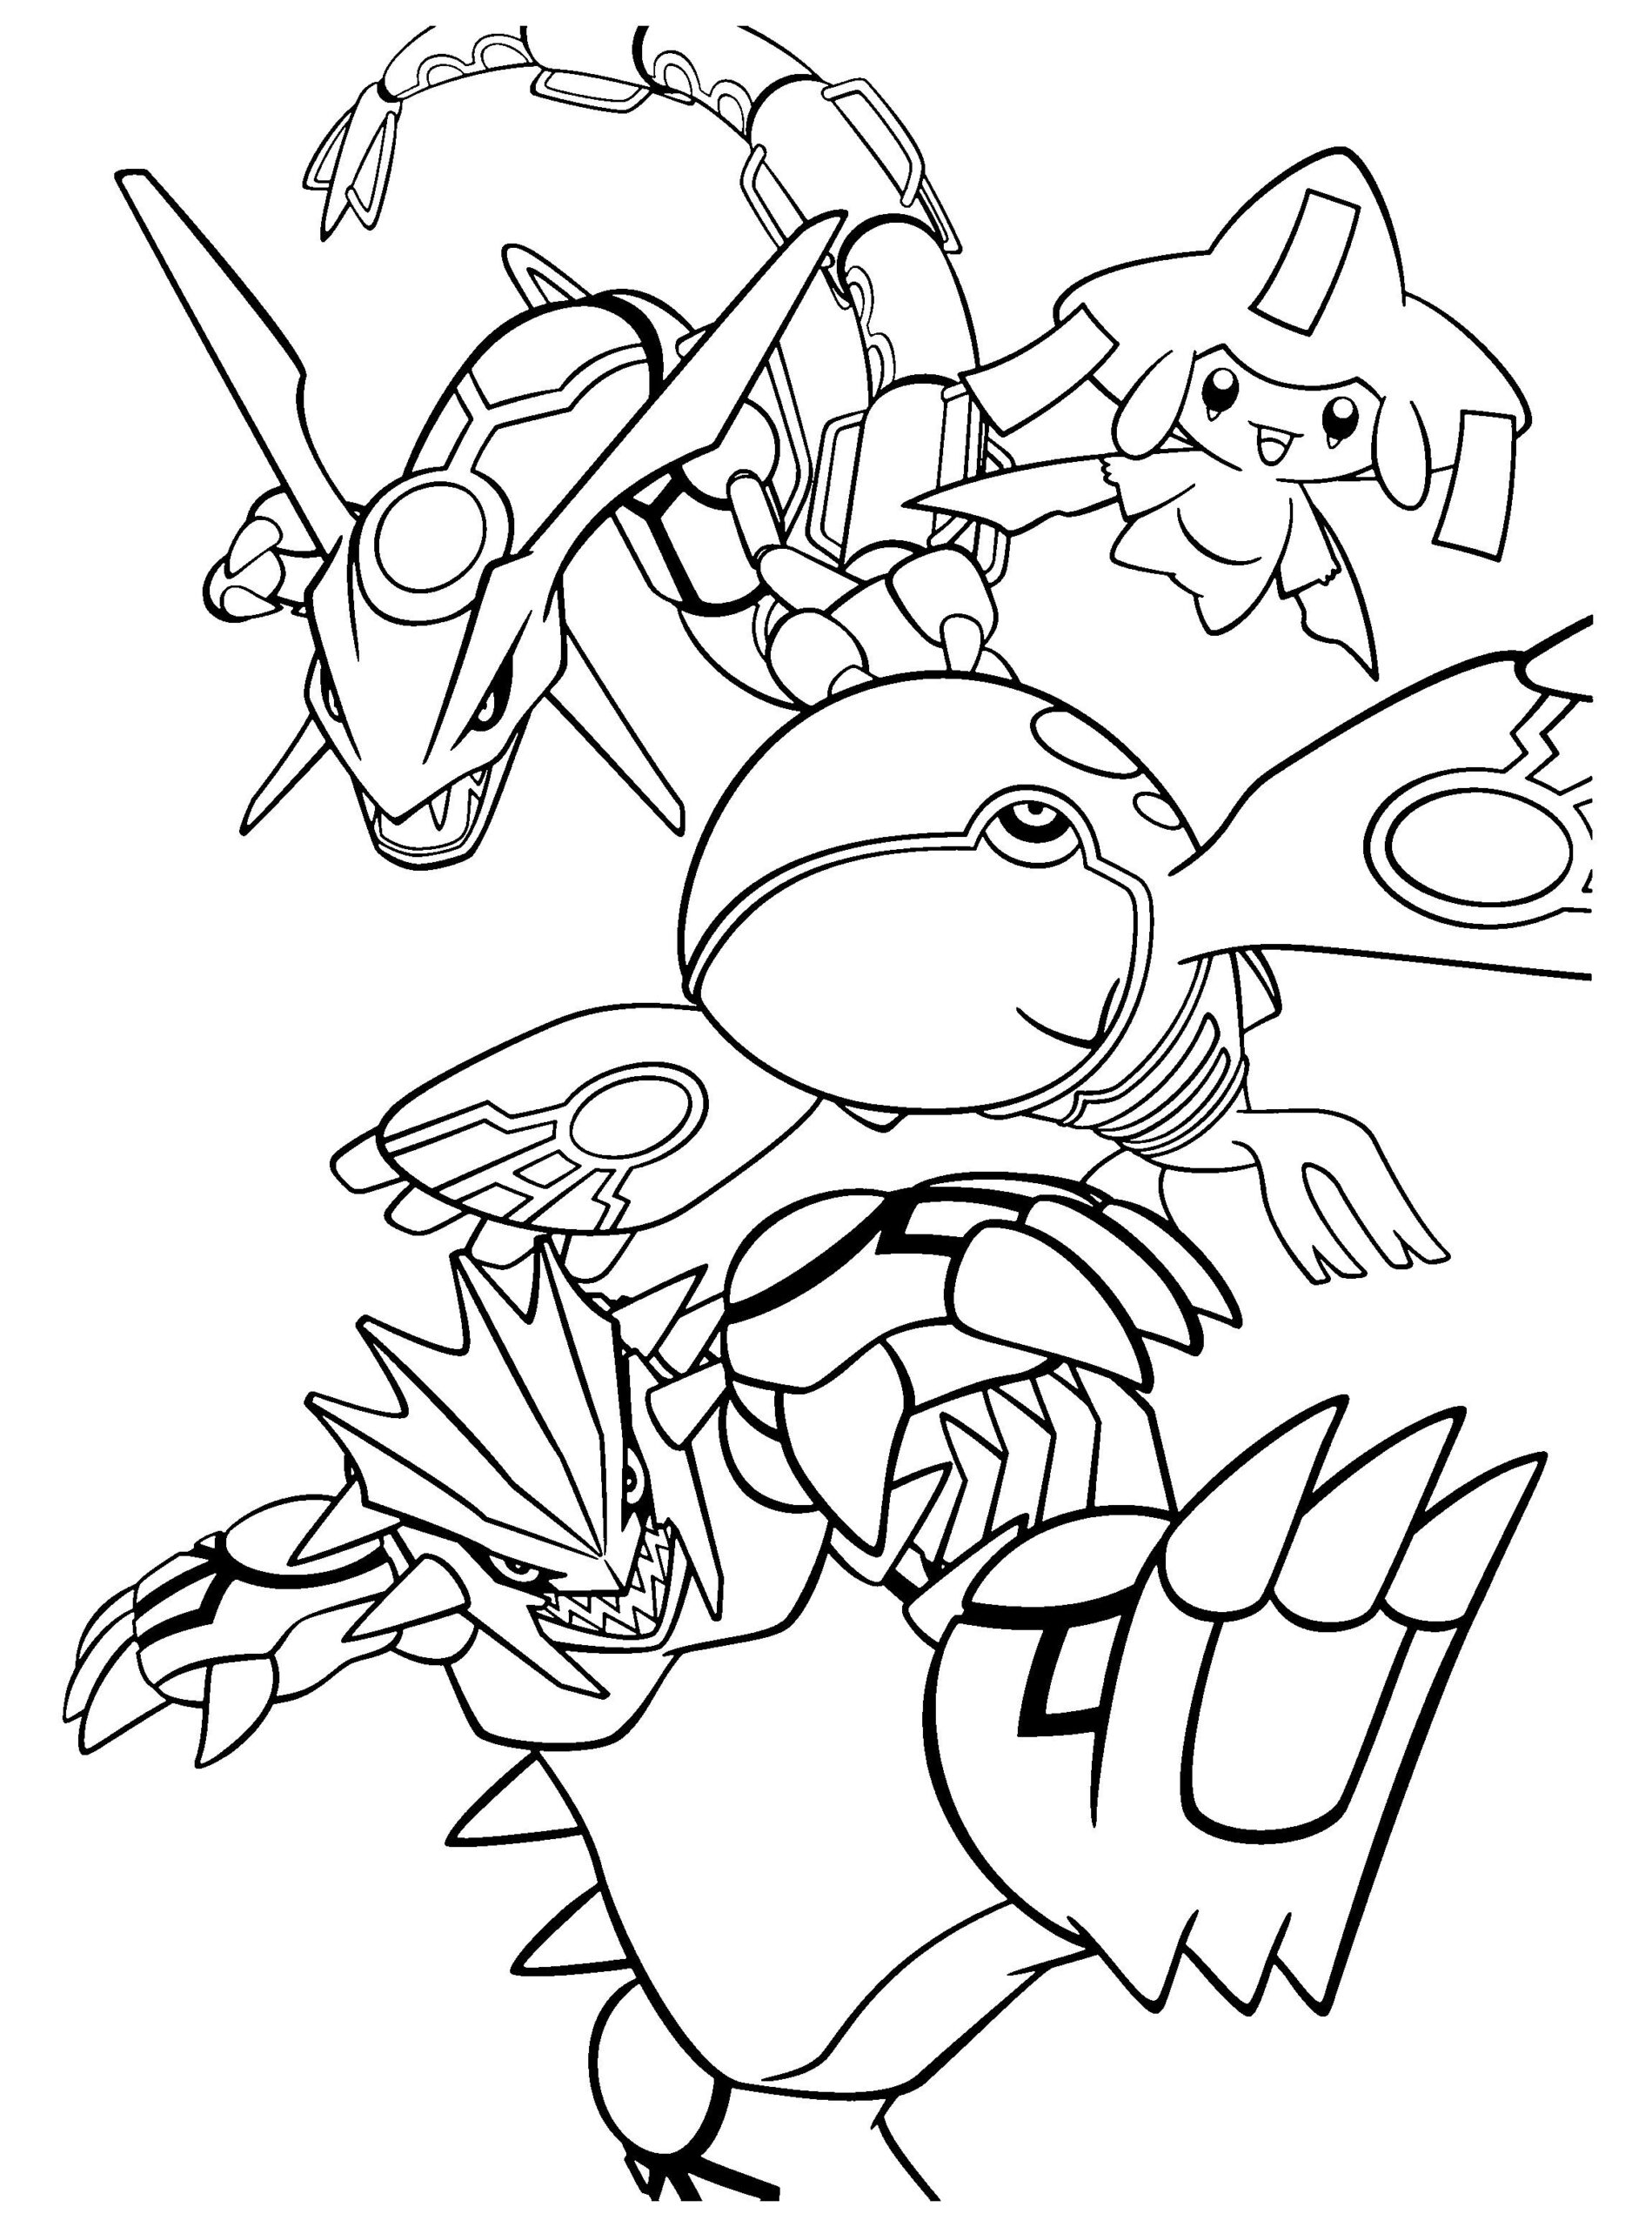 Palkia Coloring Pages At GetColorings Free Printable Colorings 